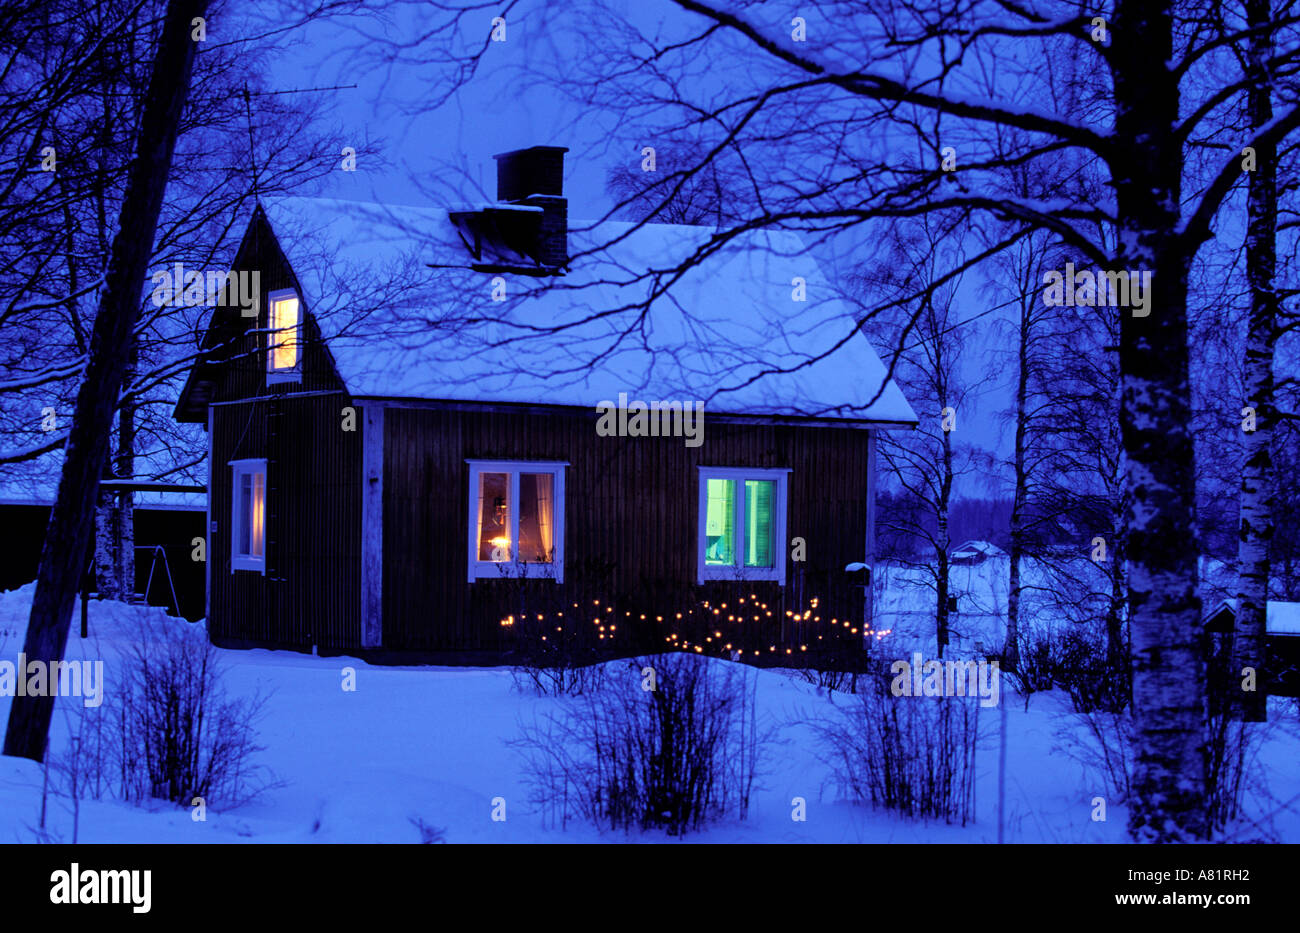 Finland, Carelie, house decorated for Christmas Stock Photo